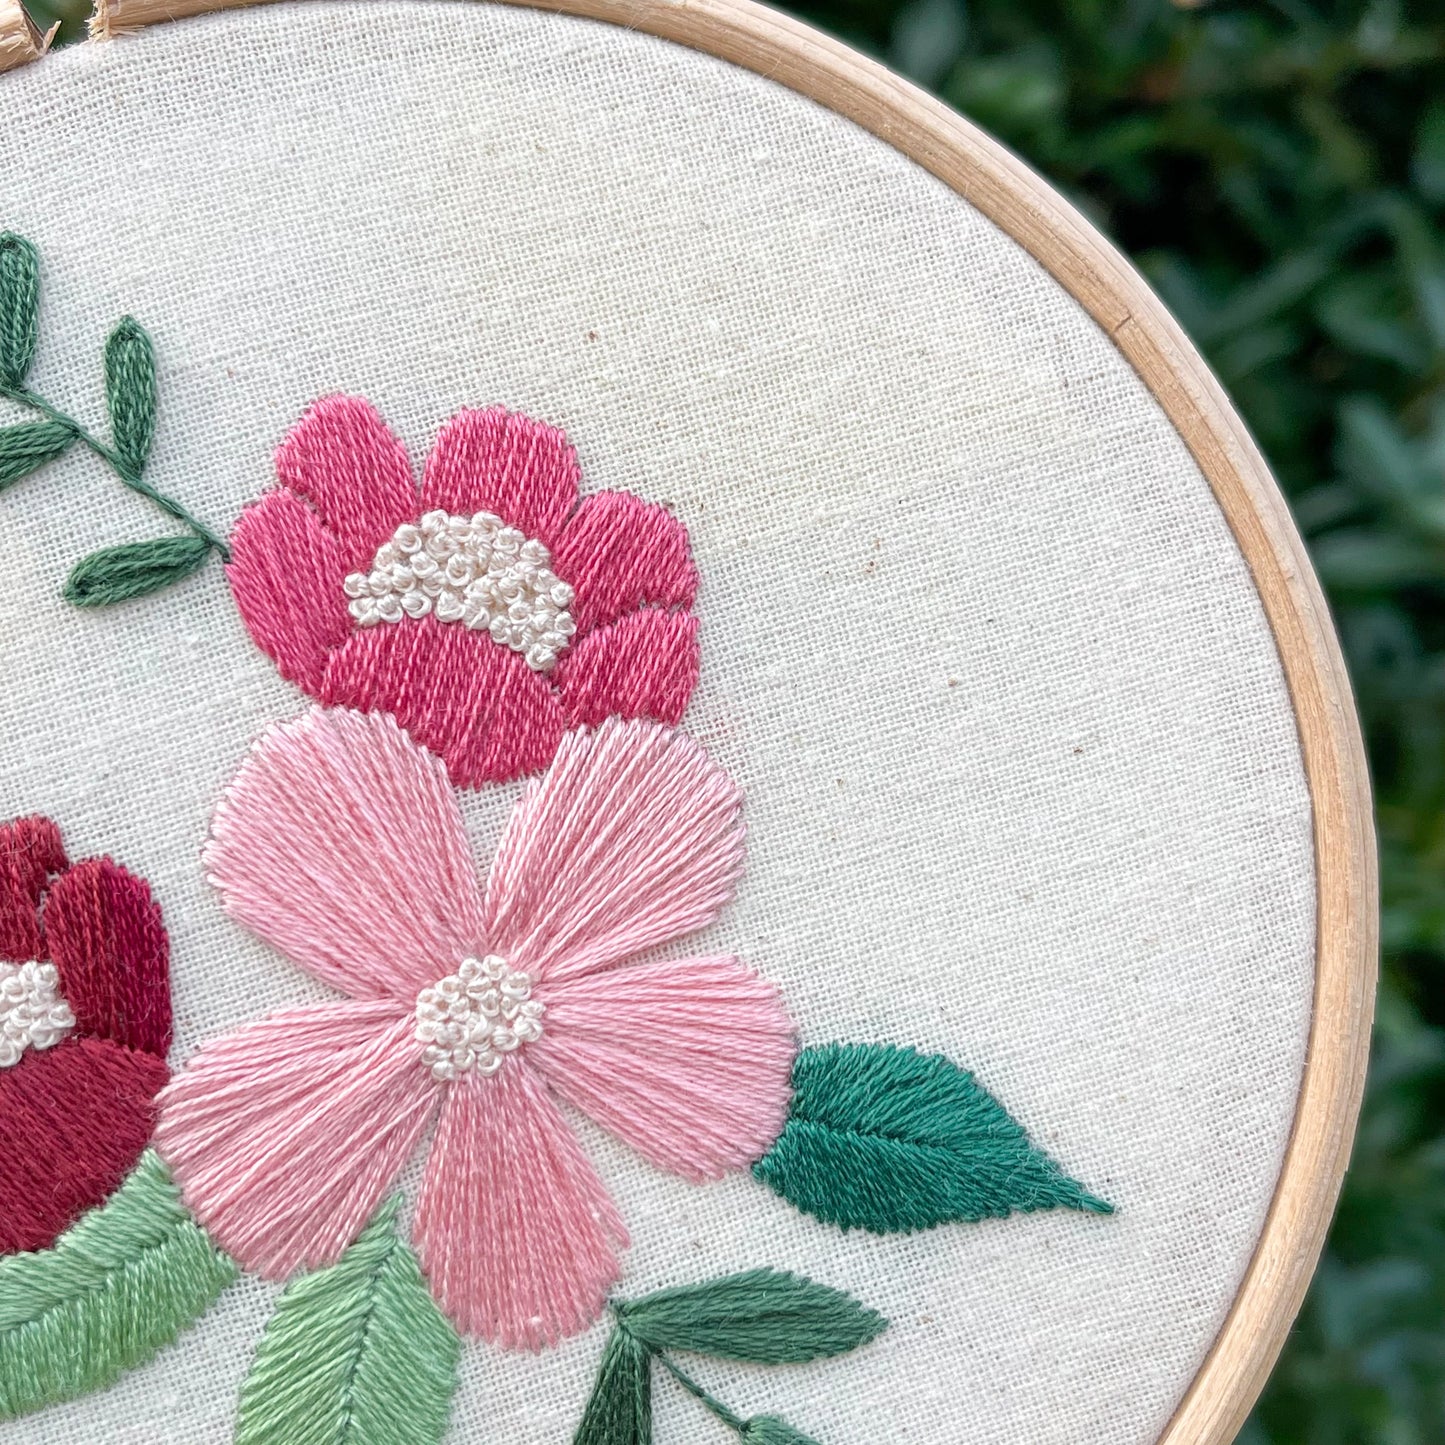 Ready Made - Floral Hand Embroidery Hoop